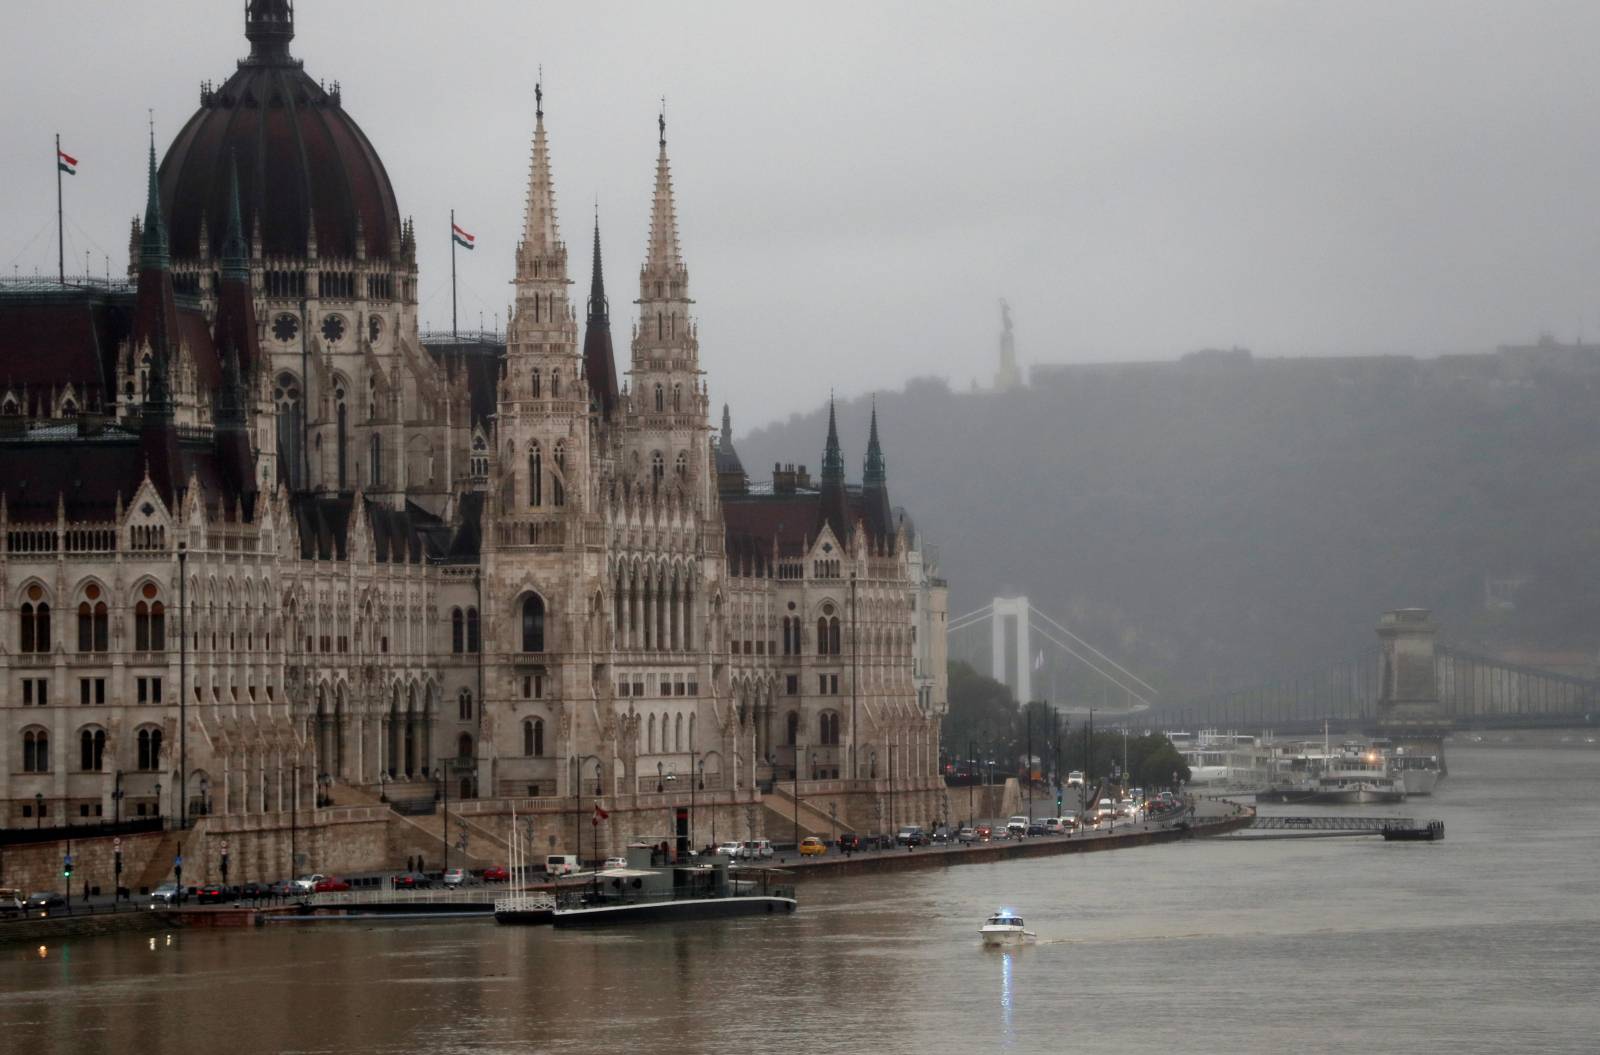 A police boat is seen on Danube river in front of the Hungarian Parliament in Budapest